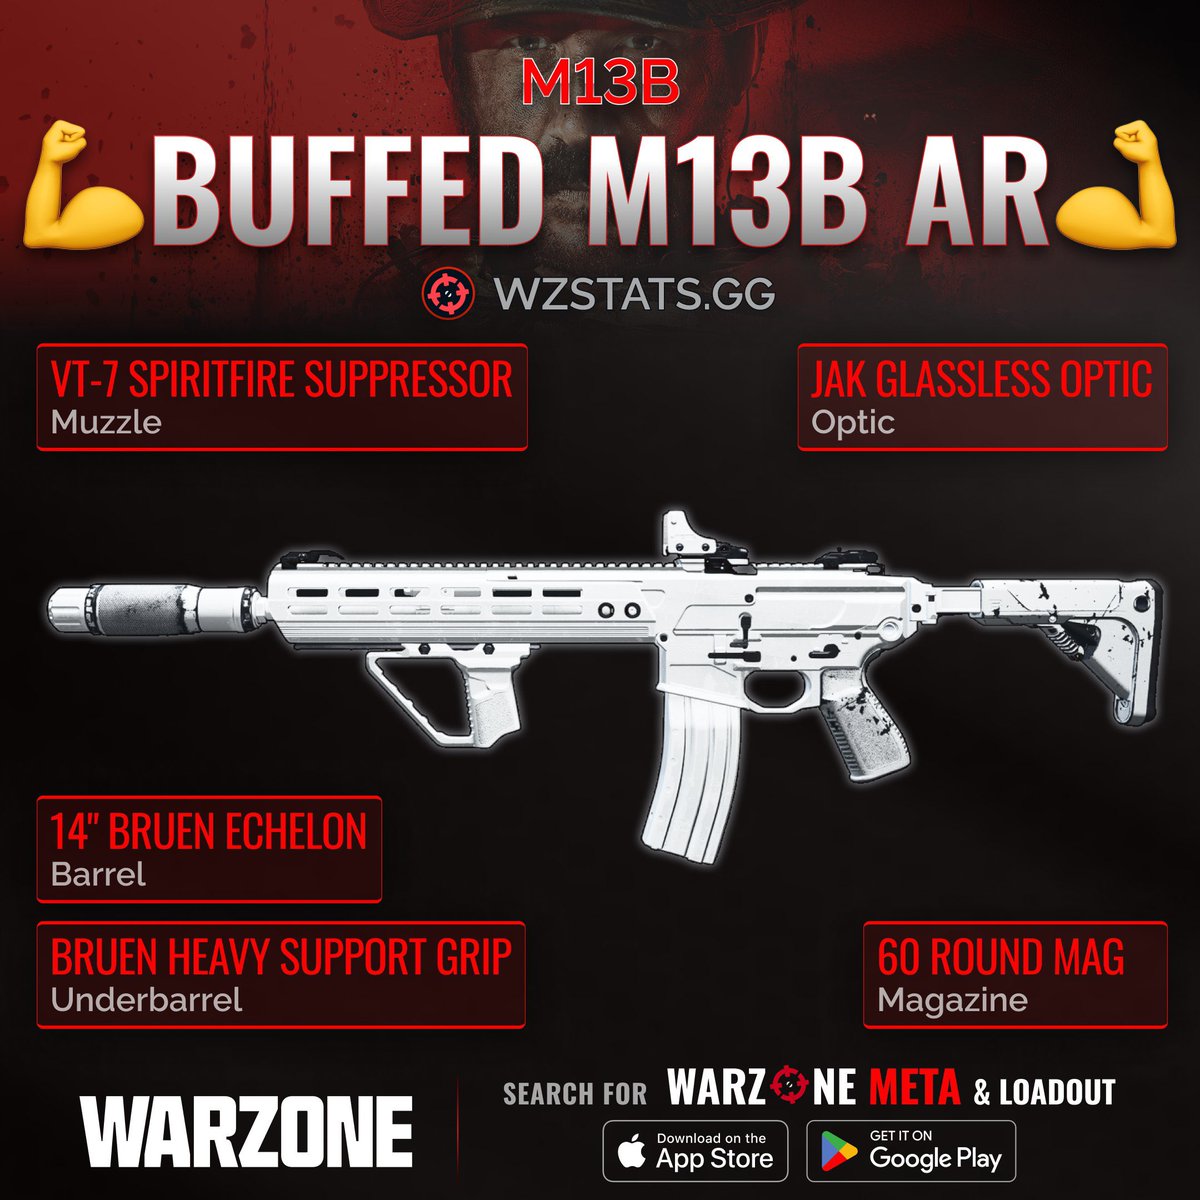 ‼️🚨 BUFFED M13B AR IN WARZONE 🚨‼️

💪 The BUFFED M13B is ABSOLUTELY AMAZING in #Warzone now! 💯

📈 It got a BIG DAMAGE BUFF & it’s ONE OF THE FASTEST TTK ARs now! 🔥

✅ SUPER EASY TO USE
✅ Great TTK
✅ Large Mag